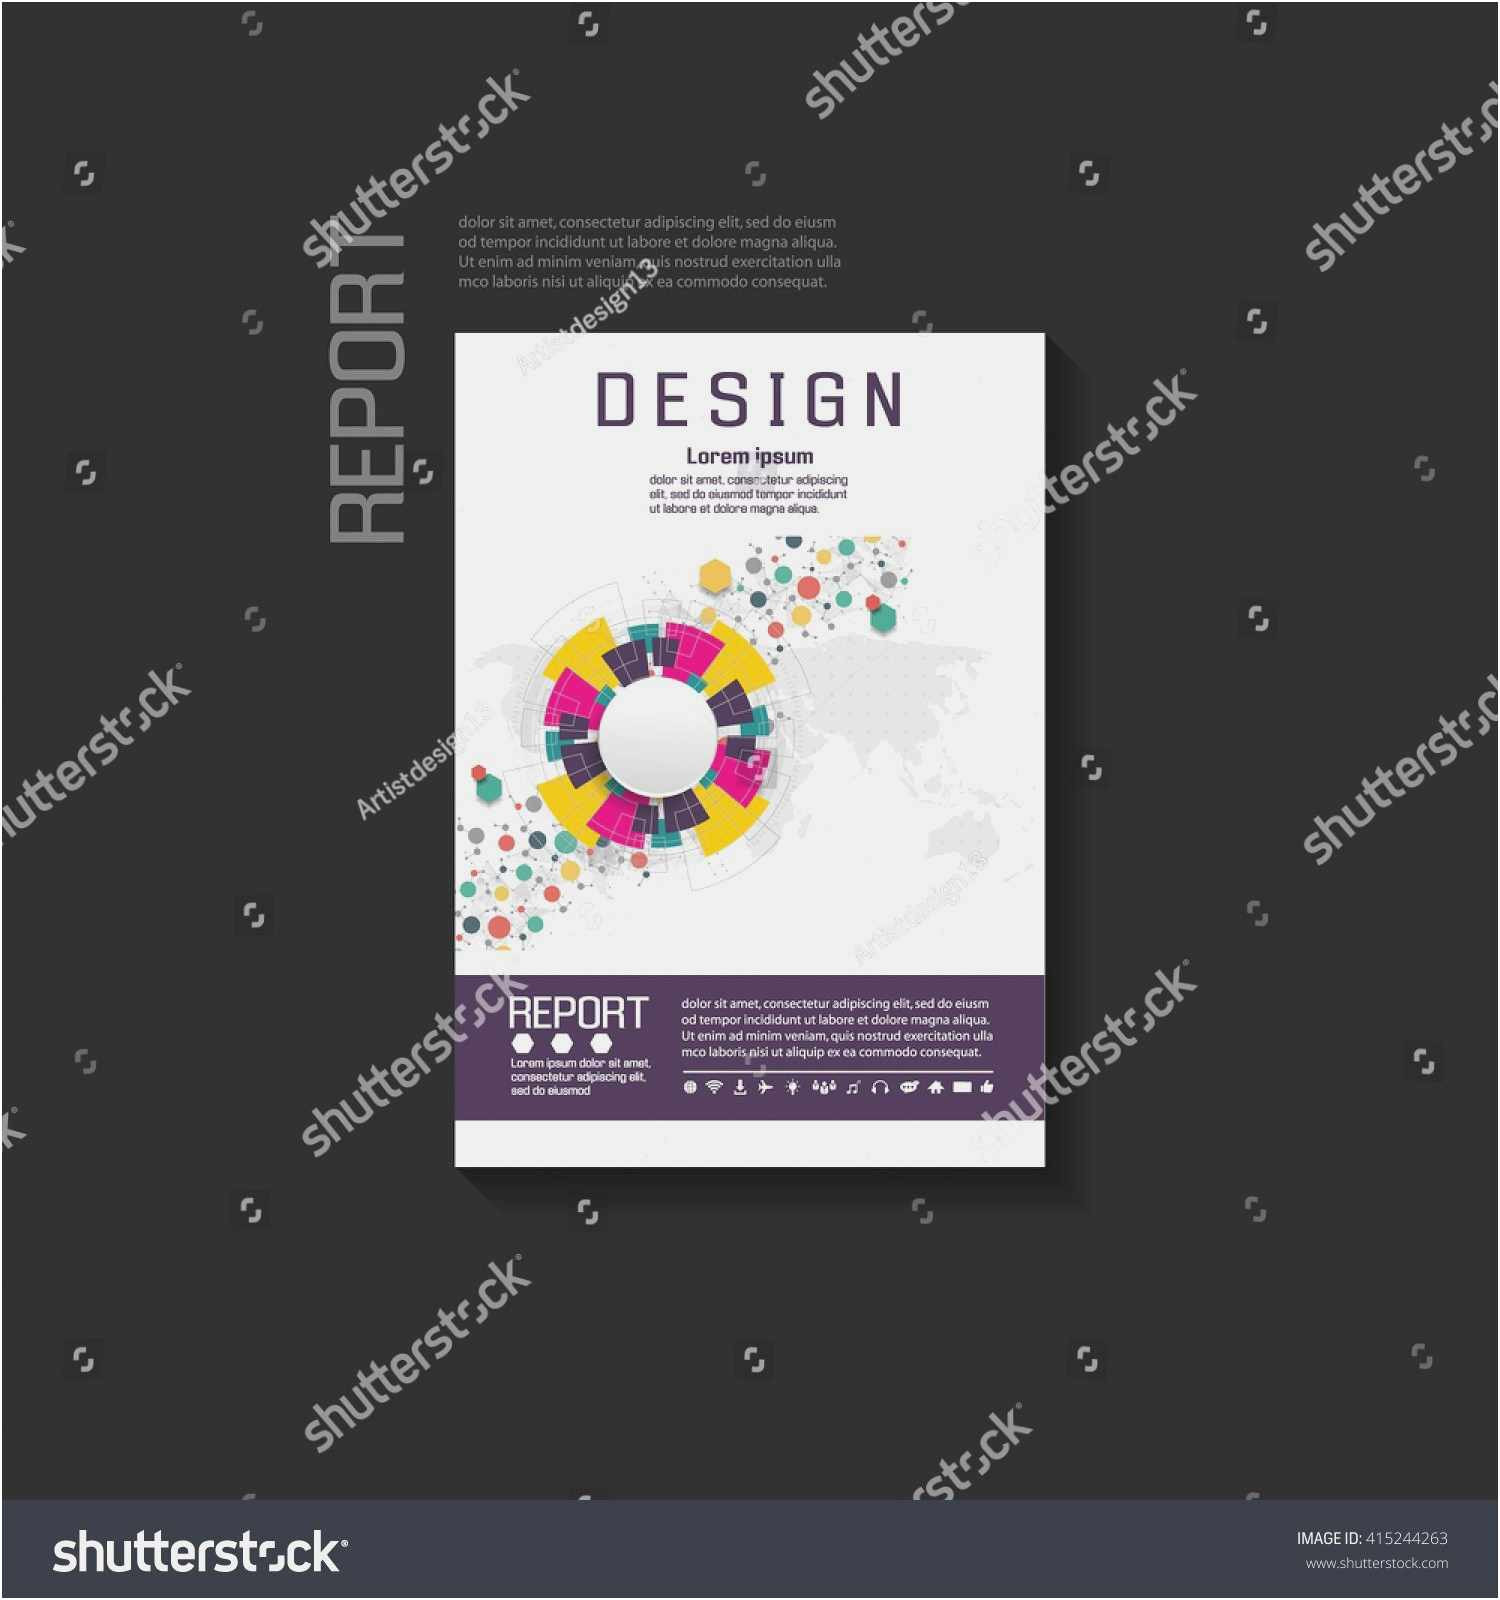 Elegant Microsoft Word Card Template Of Free Business Cards Templates for Word